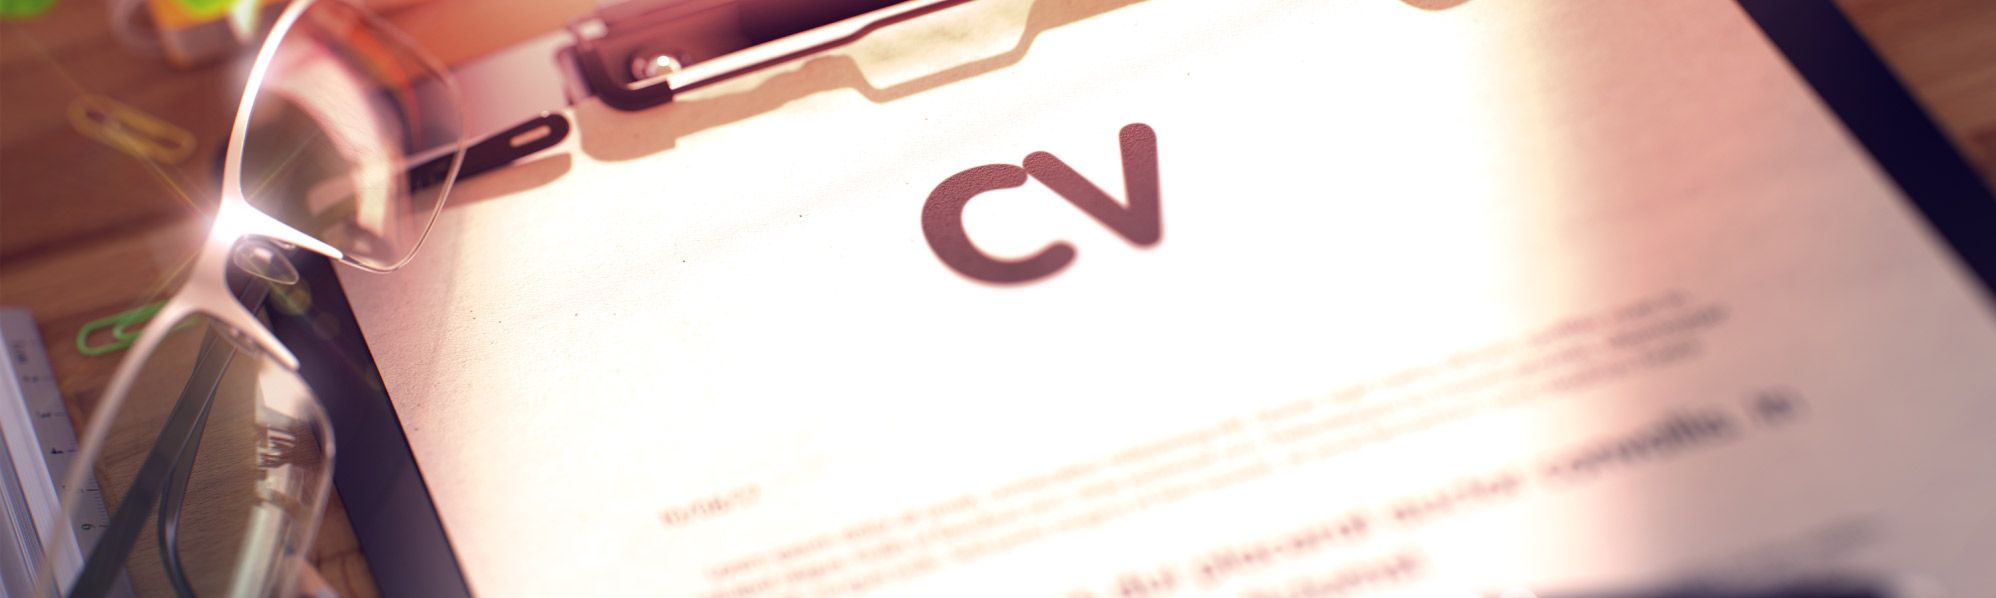 How To Make Your Cv Stand Out